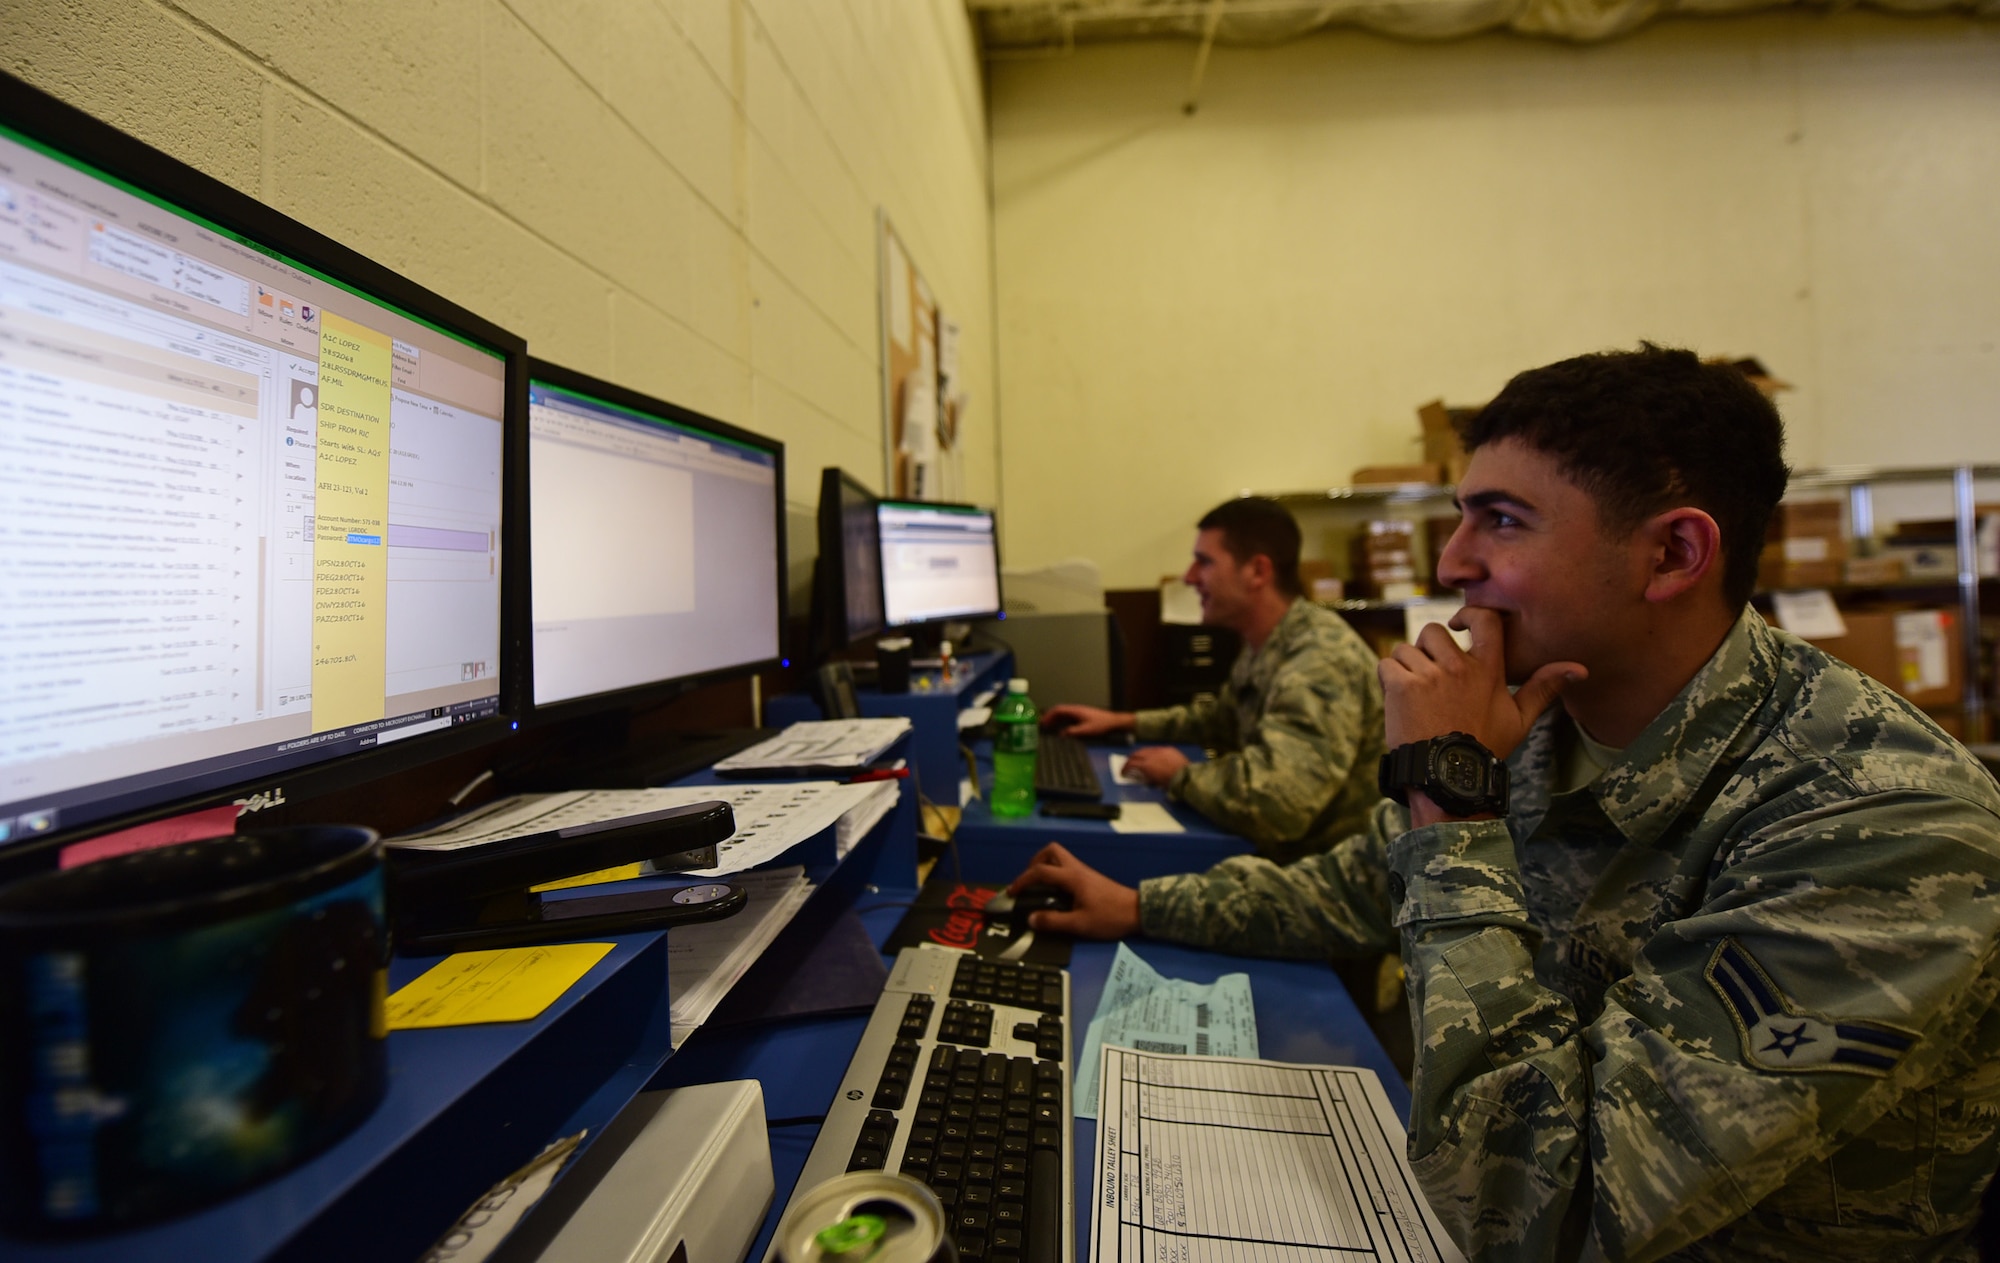 Airman 1st Class Barney Lopez and Airman Jordan Dean, traffic management apprentices assigned to the 28th Logistics Readiness Squadron, log shipments received for the day at Ellsworth Air Force Base S.D., Nov. 8, 2016. They log in shipments upon arrival to ensure the prompt delivery of products around the base. (U.S. Air Force photo by Airman 1st Class James L. Miller)